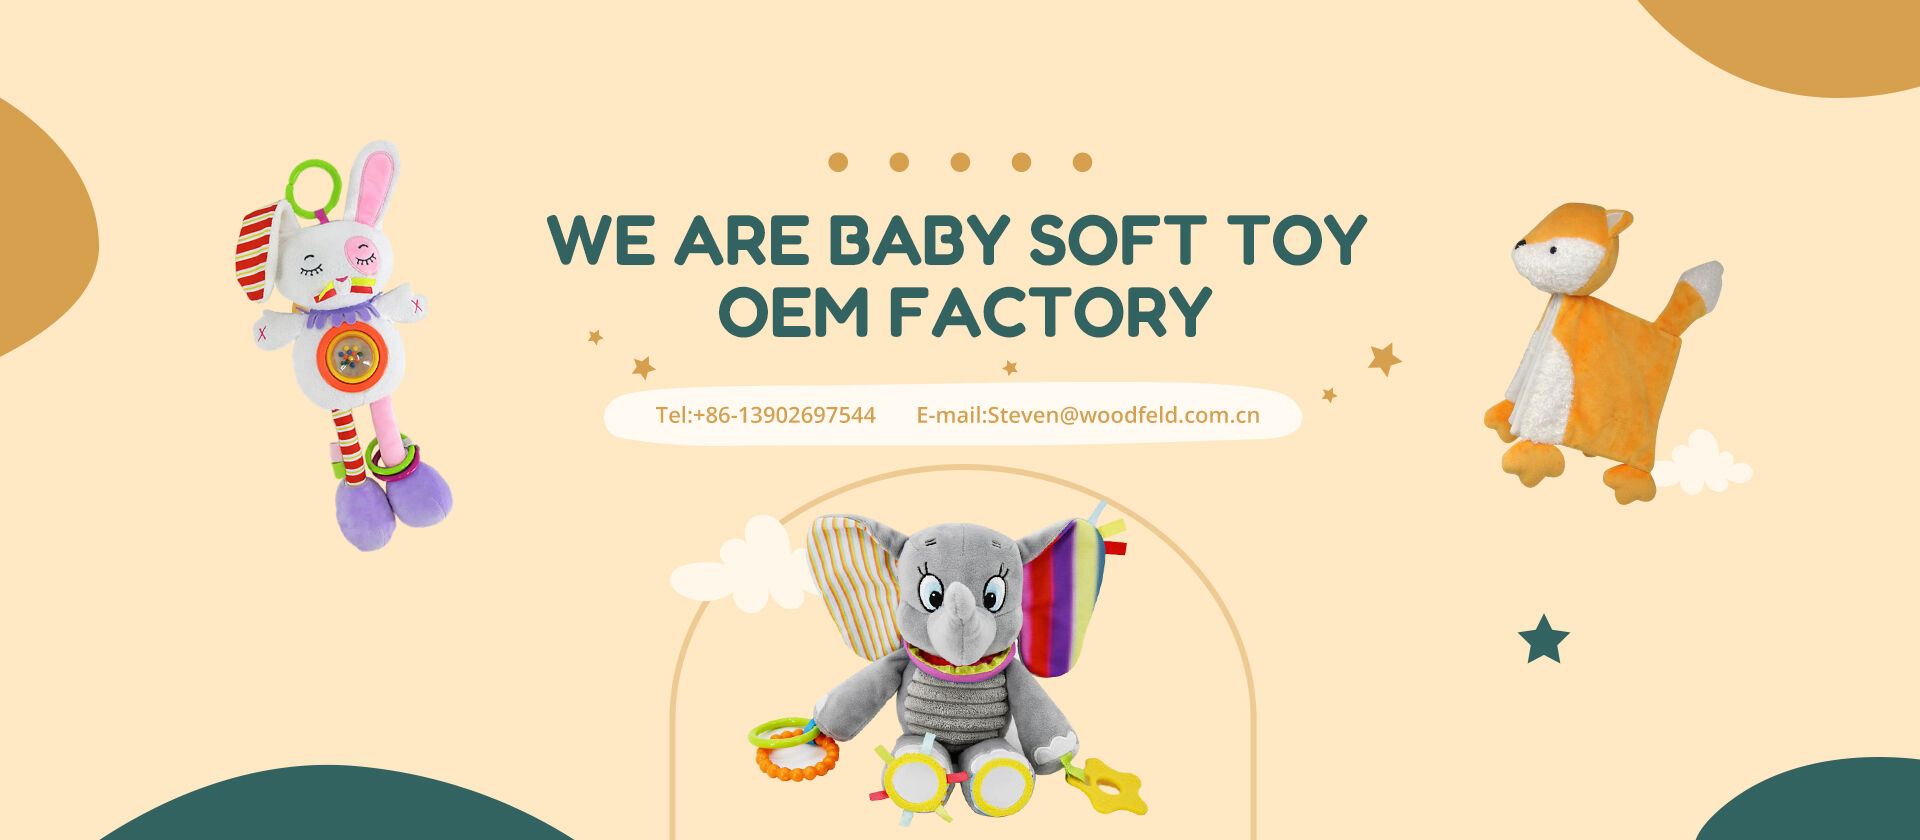 Dongguan Woodfield Baby Products Company Limited